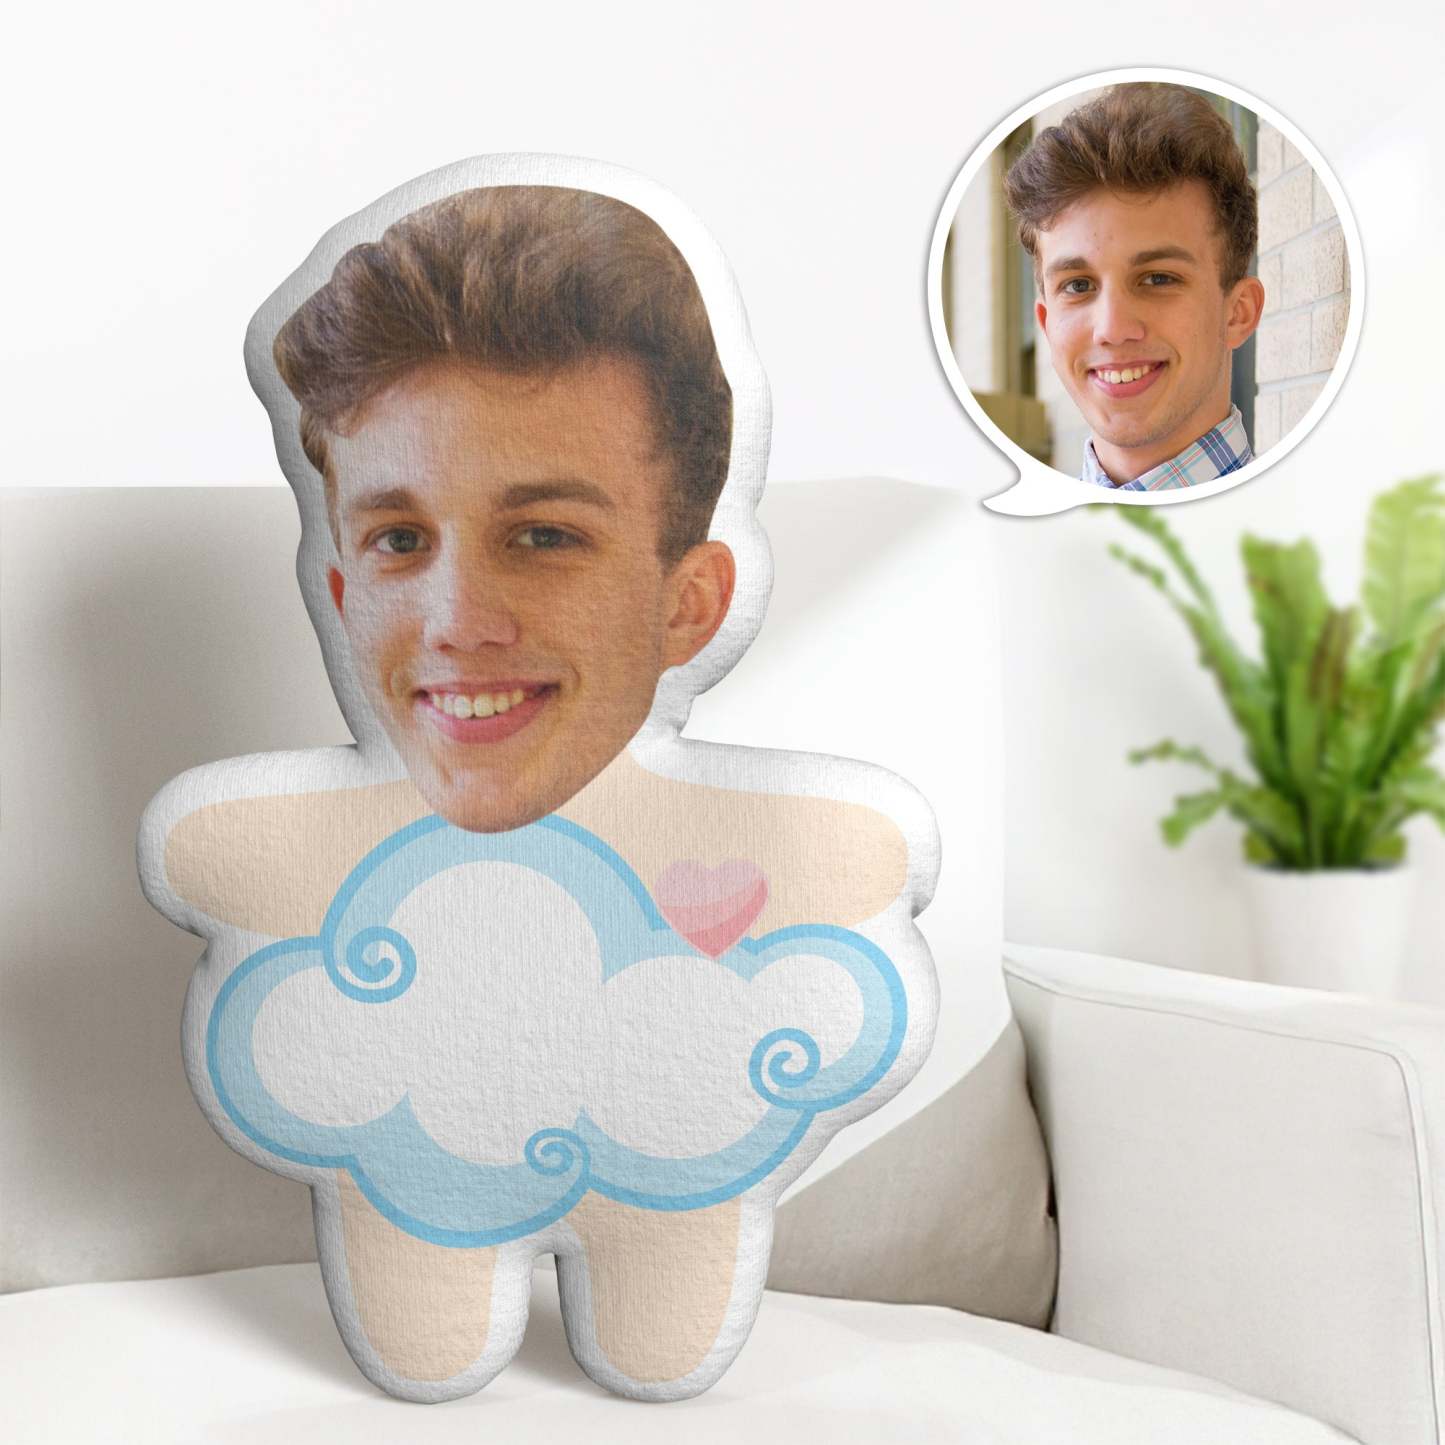 Personalized Face Minime Throw Pillow Custom Cloud Minime Pillow Valentine's Day Gifts - auphotoblanket